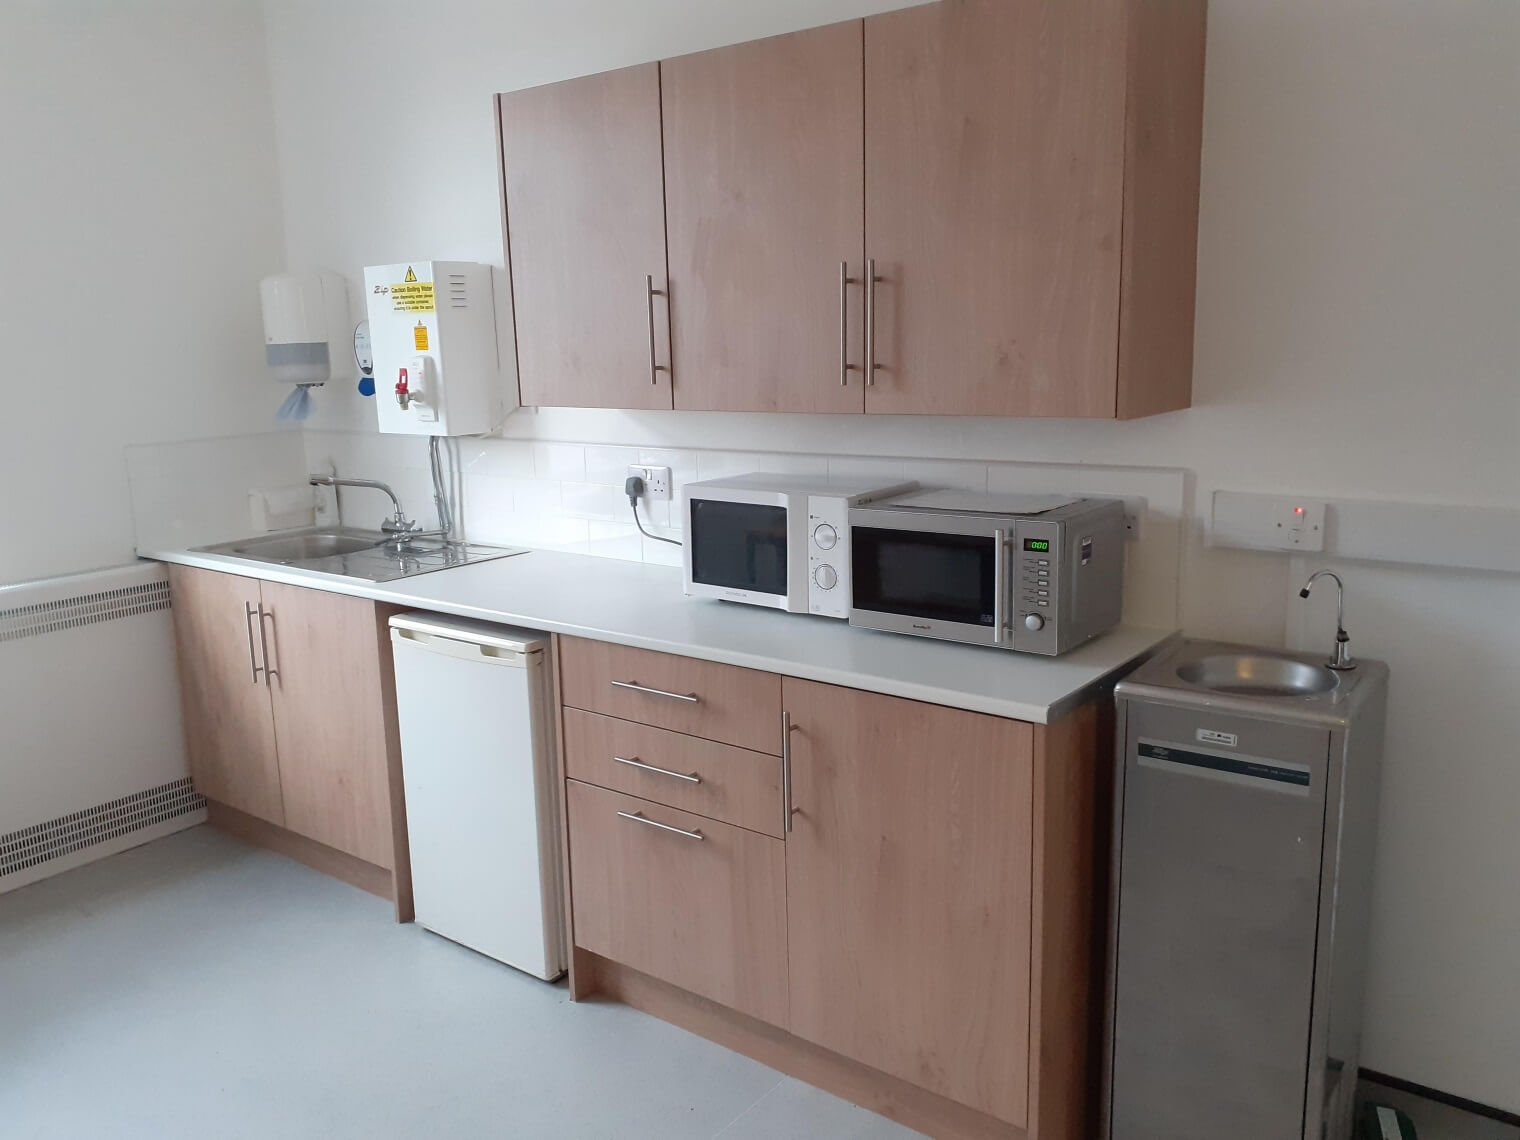 Creating ‘healthy spaces’ for NHS staff: refurbishing a health centre’s staff kitchen